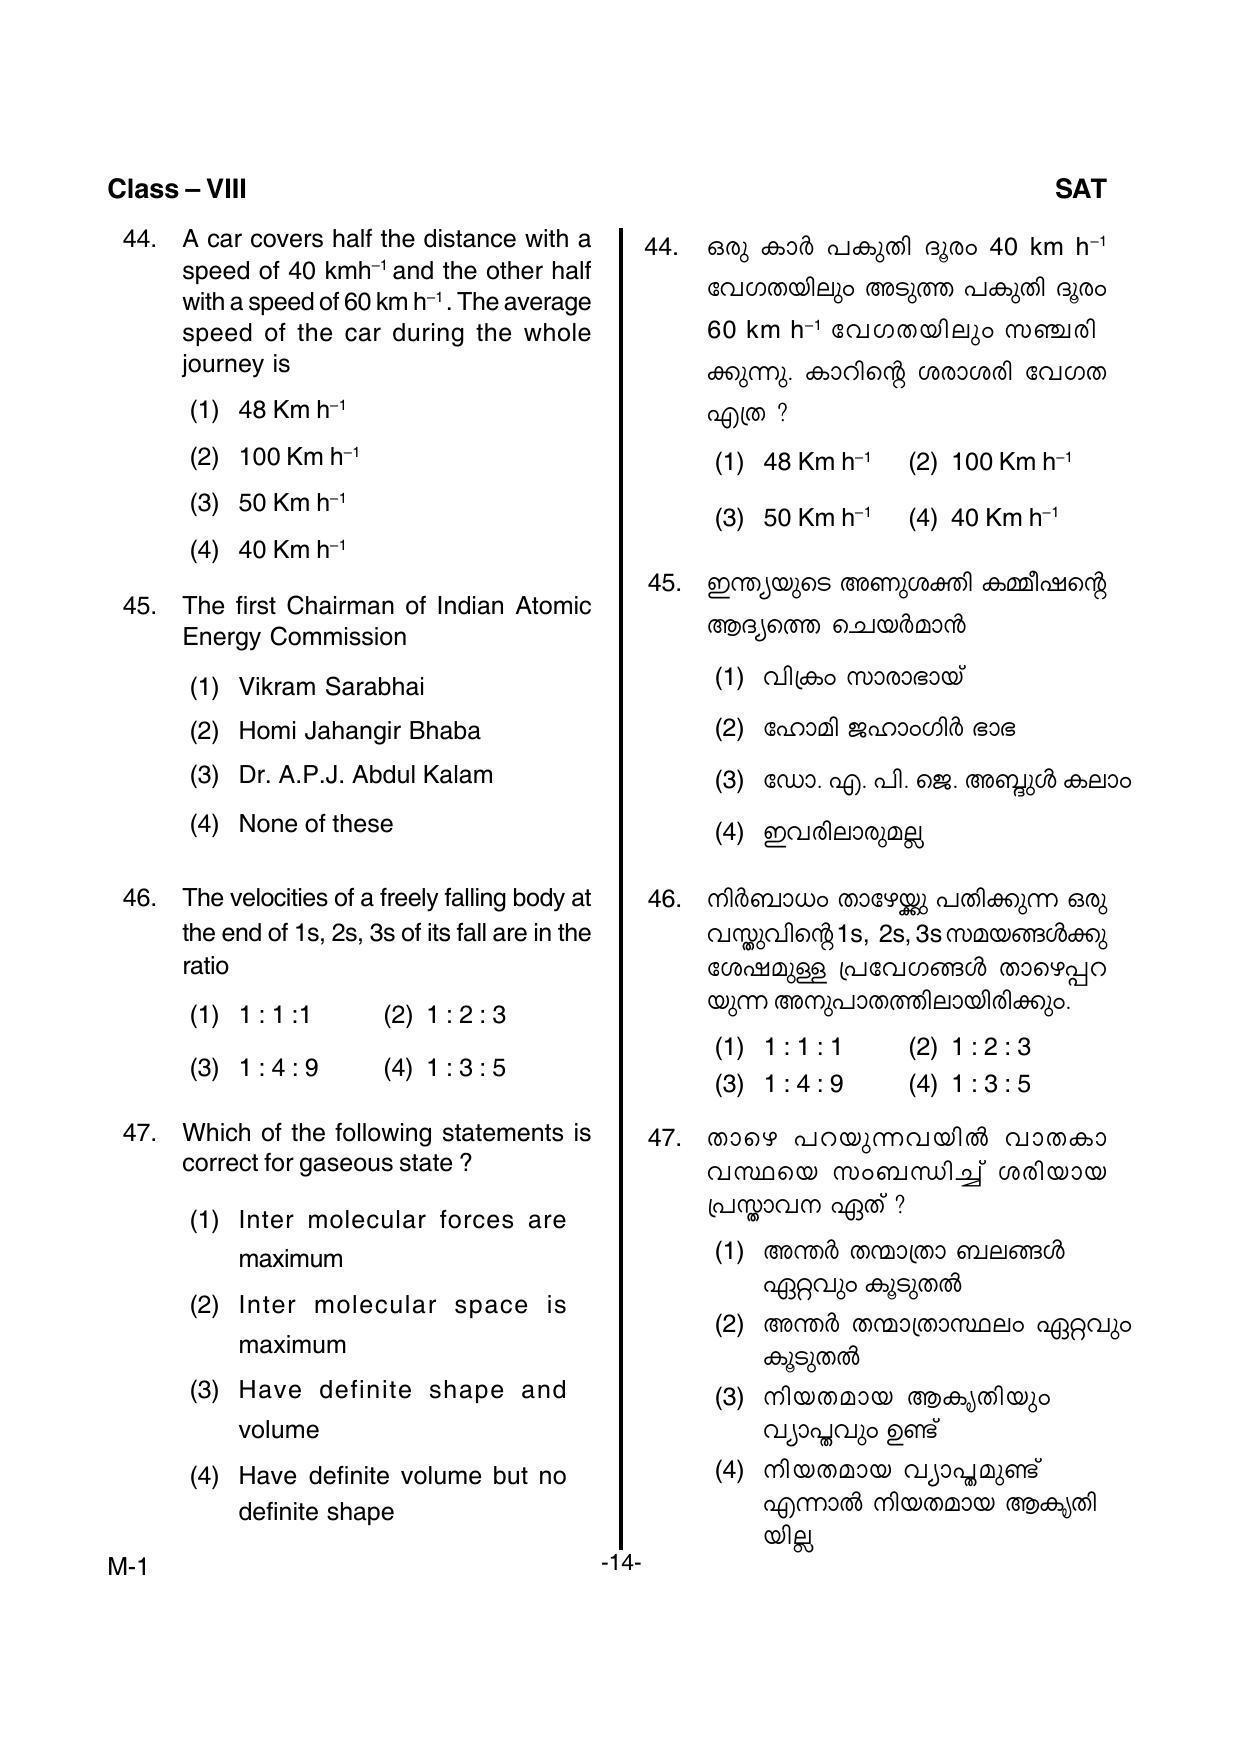 MAT 2016 Class 8 Kerala NMMS Question Papers - Page 16